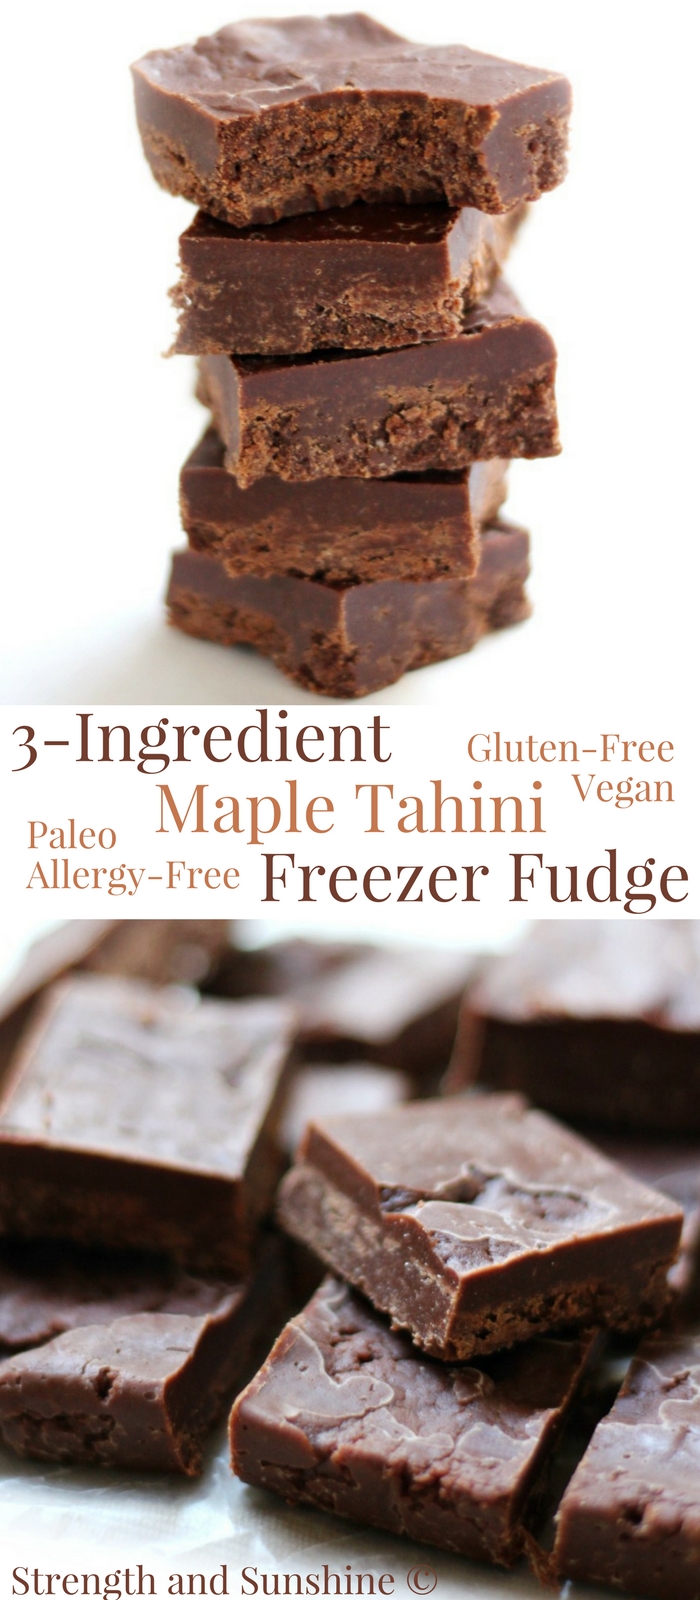 3-Ingredient Maple Tahini Freezer Fudge (Gluten-Free, Vegan, Paleo) | Strength and Sunshine @RebeccaGF666 Easy like 1, 2, 3! 3-Ingredient Maple Tahini Freezer Fudge that's gluten-free, vegan, paleo, and top-8 allergy-free! A creamy and delicious no-bake dessert recipe with just dark chocolate, sesame tahini, and pure maple syrup! Give it as a gift or keep it in the freezer for a sweet tooth satisfying snack! #freezerfudge #tahini #maplesyrup #glutenfree #vegan #paleo #darkchocolate #fudge